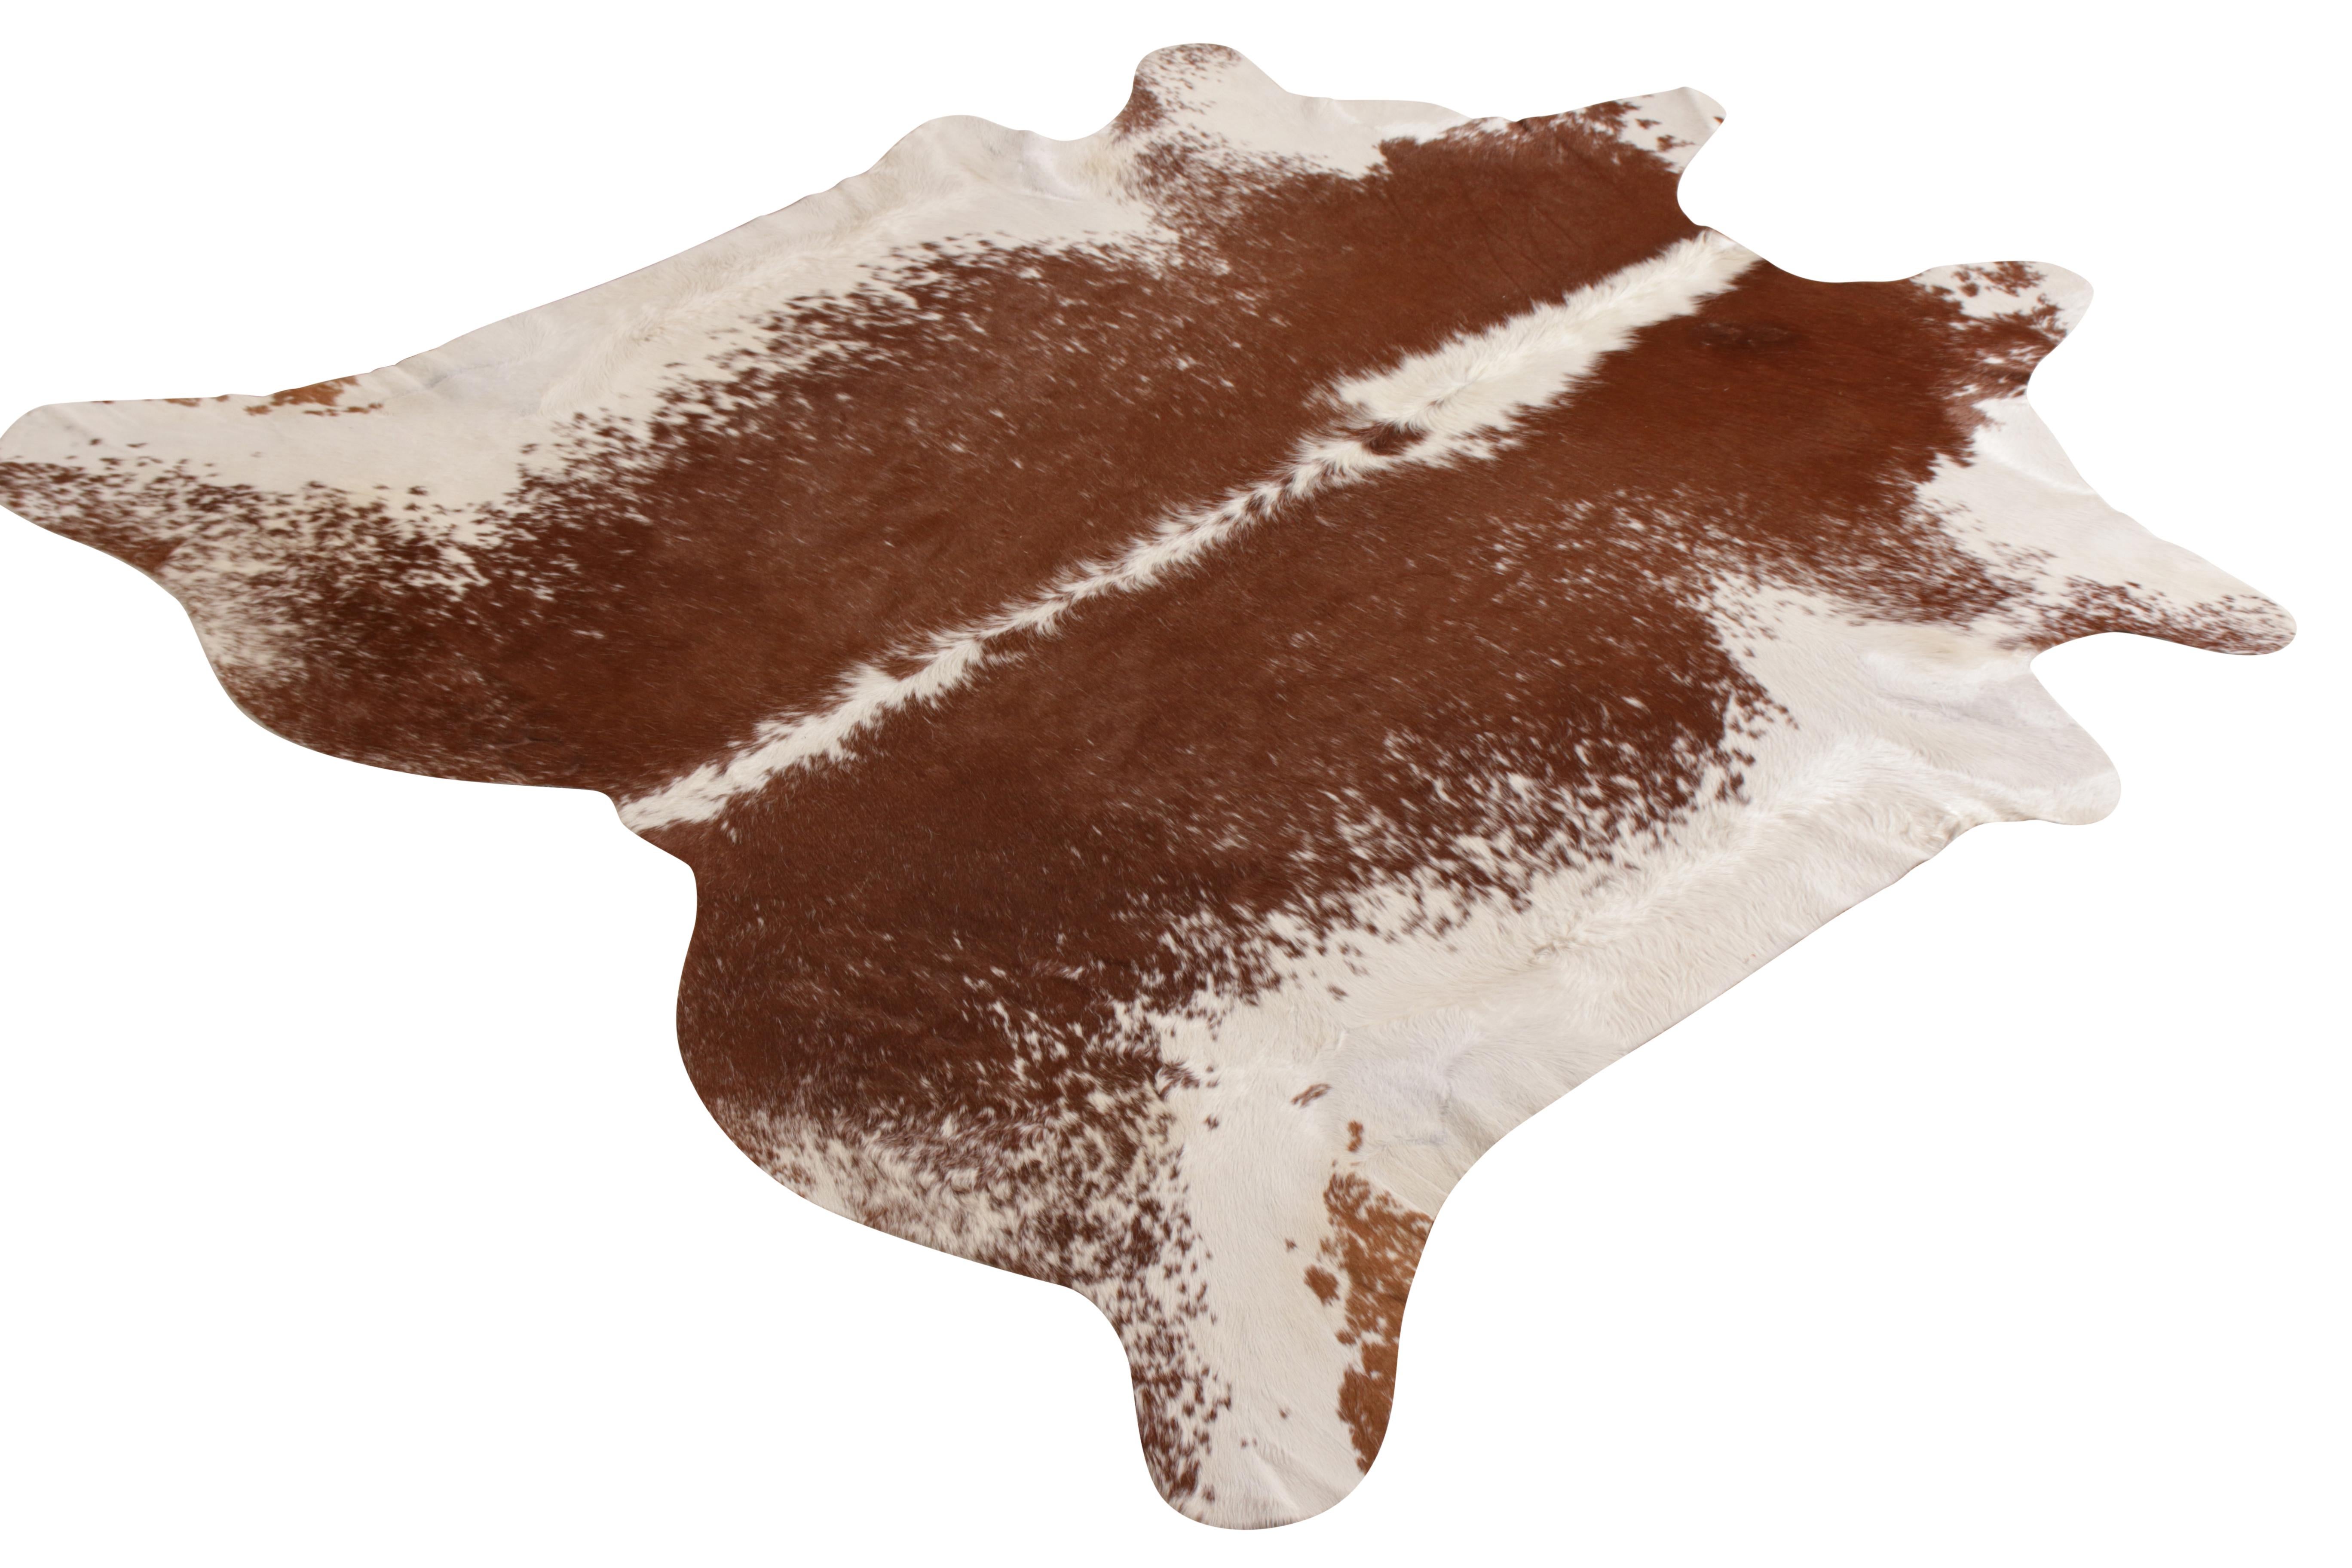 A 7x7 from Rug & Kilim’s line of handmade cowhide rugs. Enjoying a silky, lustrous sheen complementing the pallet of white and brown with cream accents. A comfortable, textural choice, particularly well suited to country homes and rustic interiors.